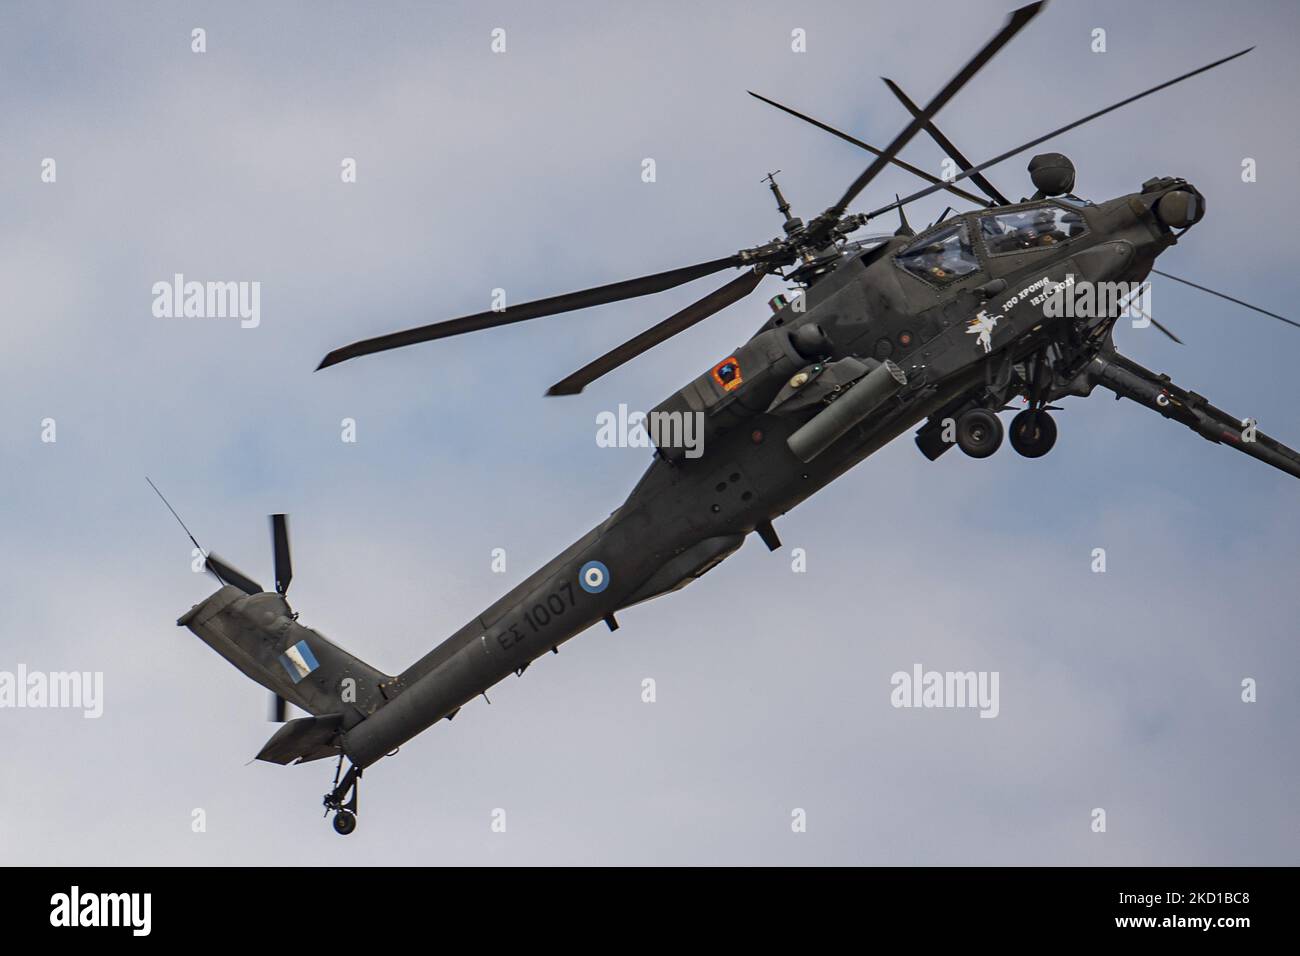 A Boeing AH-64 Apache helicopter and a Bell OH-58 Kiowa army helicopter from the Greek Army as seen flying and manoeuvering during a flying display demonstration during Athens Flying Week 2021 Air Show at Tanagra Air Base Airport. The Apache of the Hellenic military is the AH-64D Apache Longbow version. The specific aircraft is a twin turboshaft attack combat helicopter under the fuselage and on the wings with a machine gun, missiles, rocket and self defense capabilities. Greece, a country with strong air force is a member state of the North Atlantic Treaty Organization NATO. Tanagra, Greece o Stock Photo